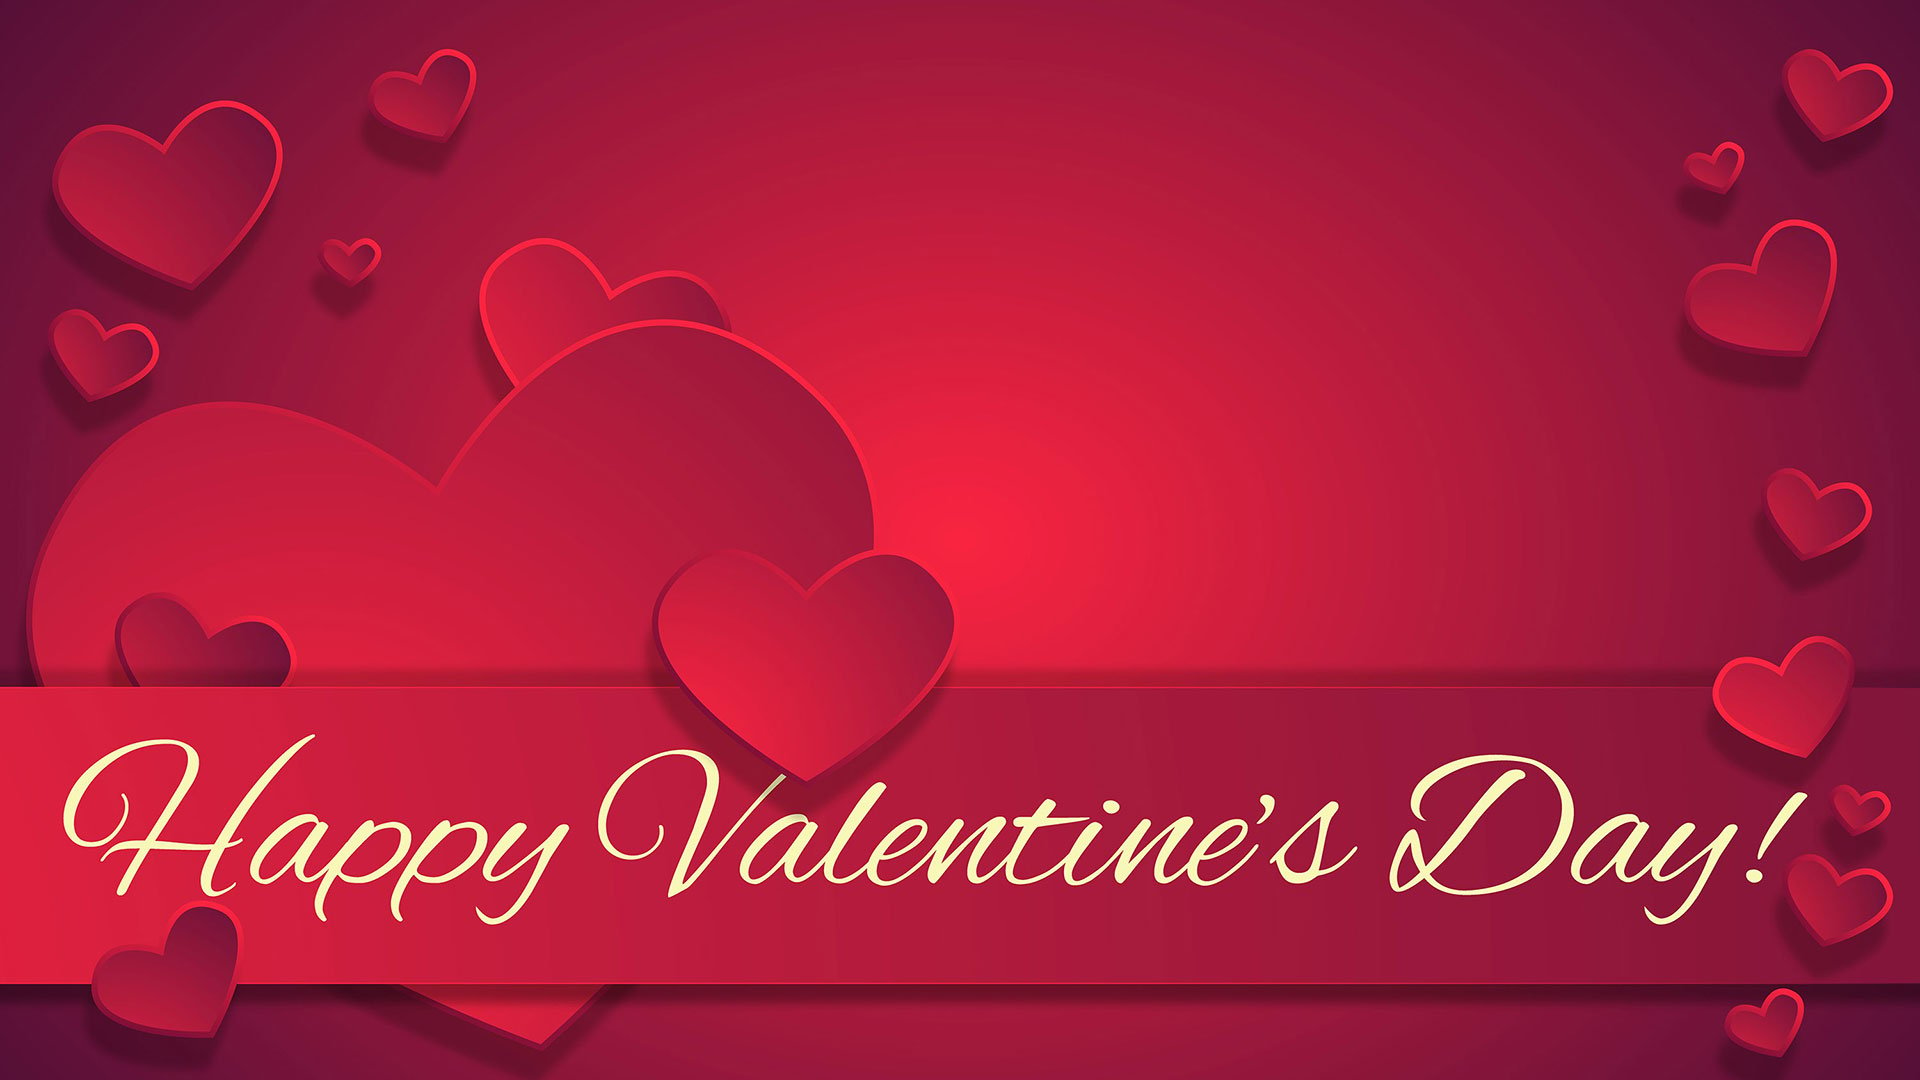 50+ Happy Valentine's Day HD Wallpapers, Backgrounds ...